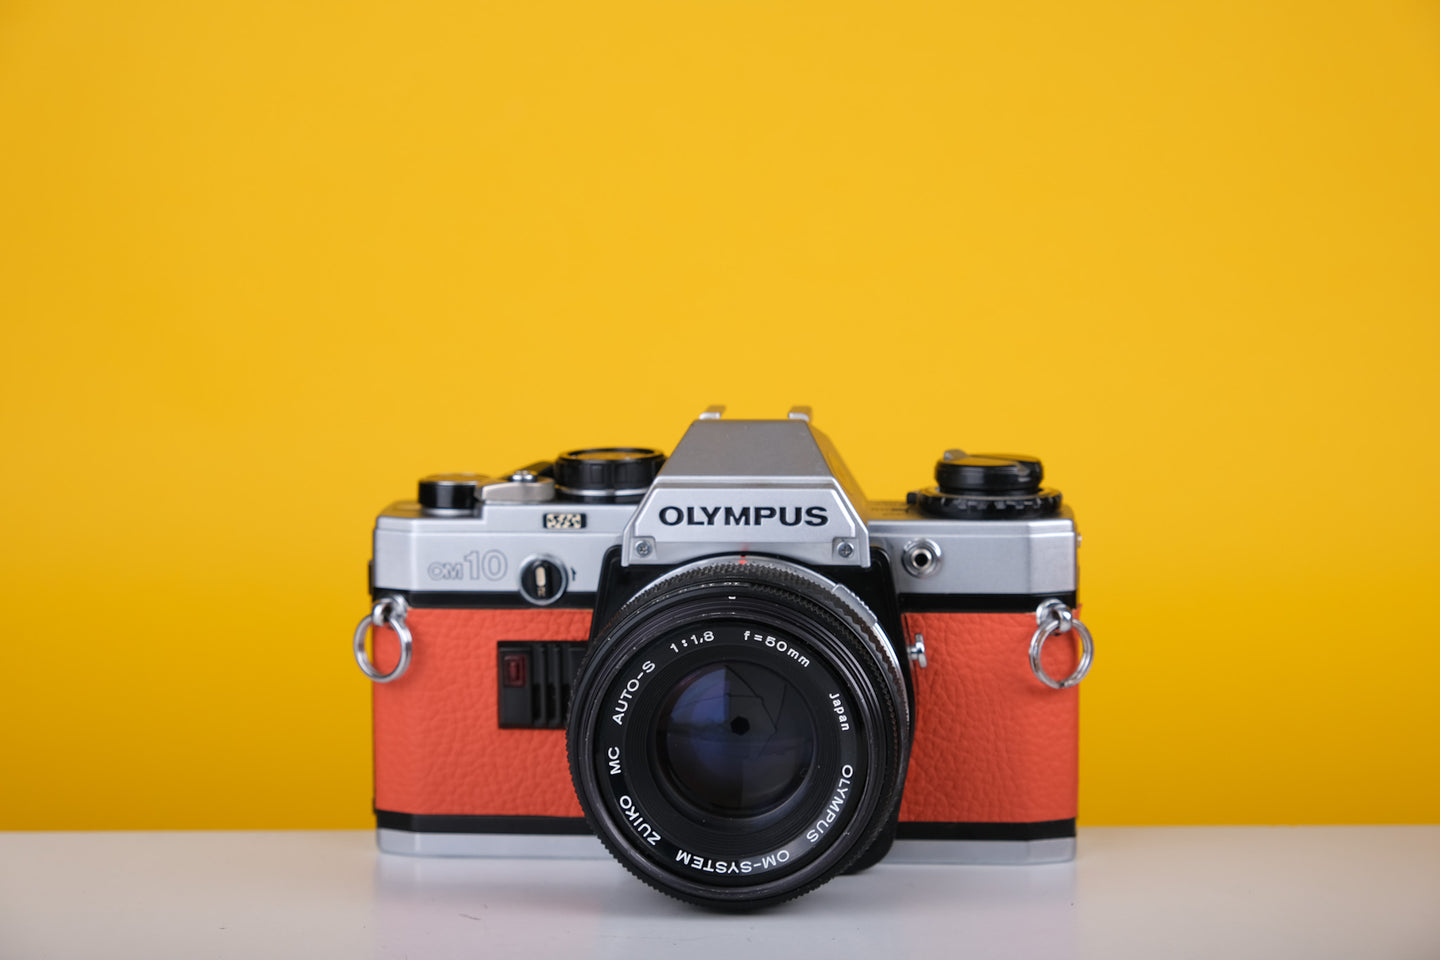 Olympus OM10 Vintage Film Camera with 50mm f/1.8 Lens With New Orange Leather Skin